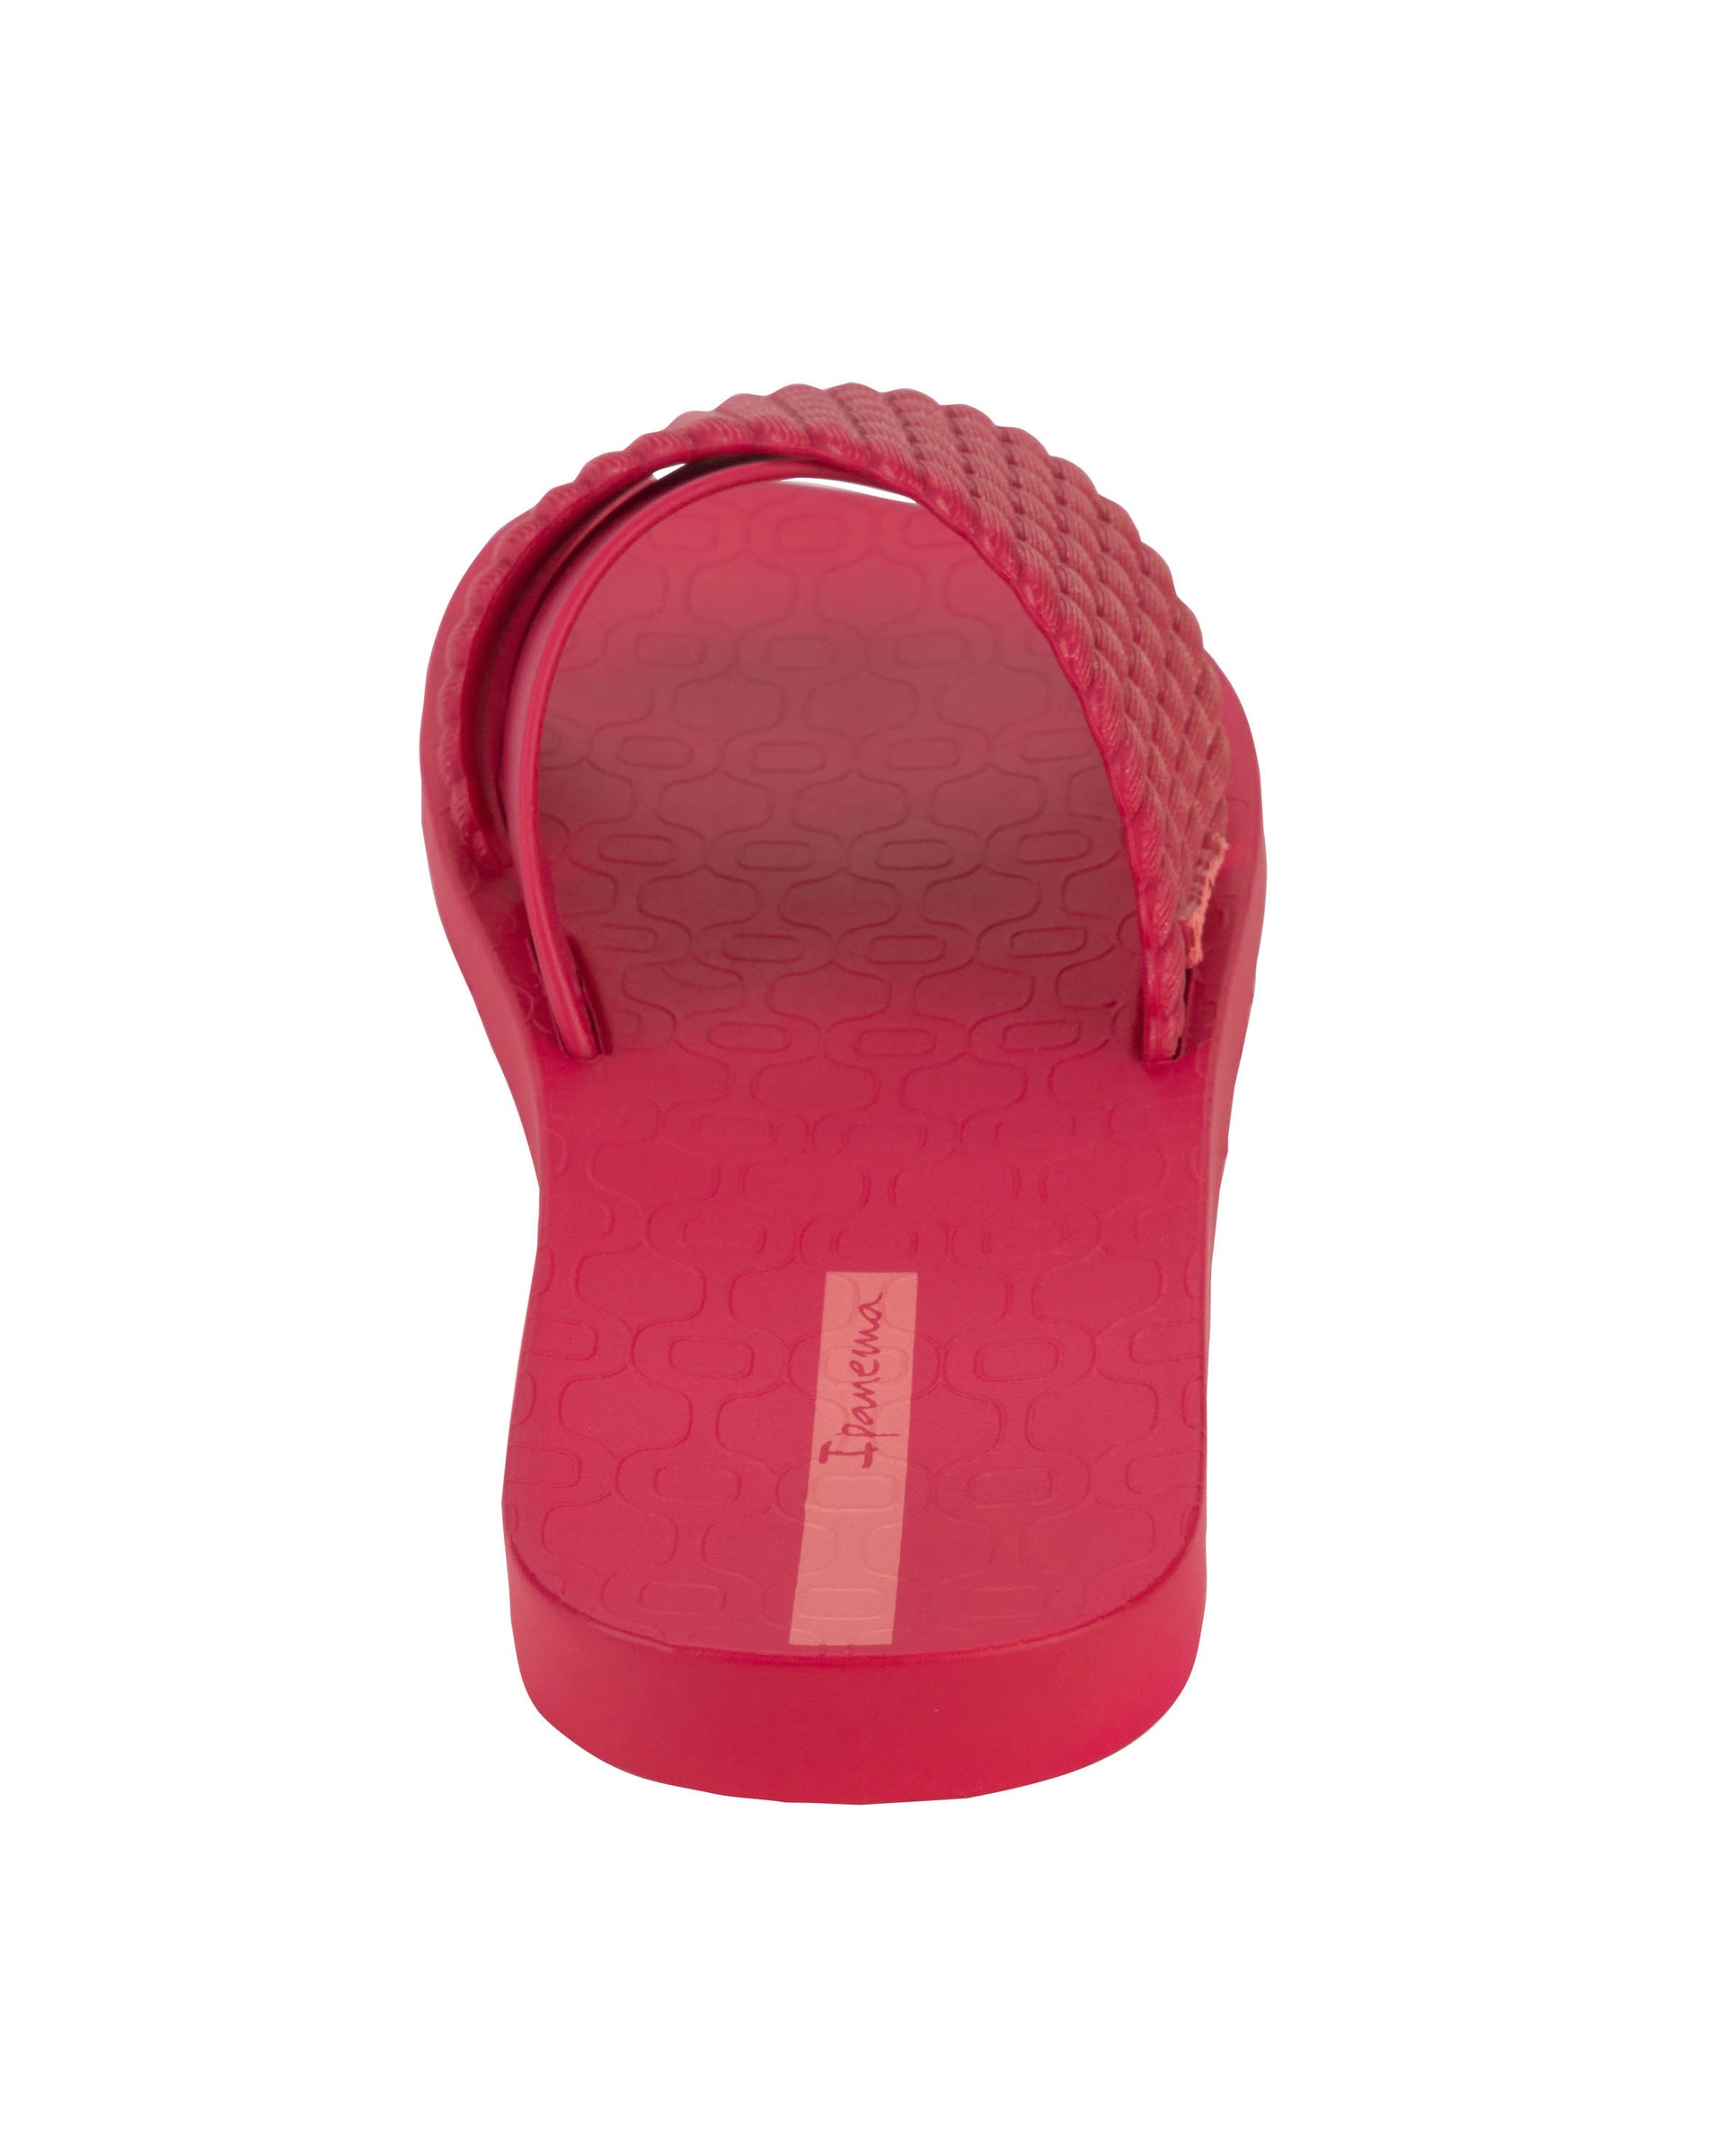 Back view of a red Ipanema Street women's slide.